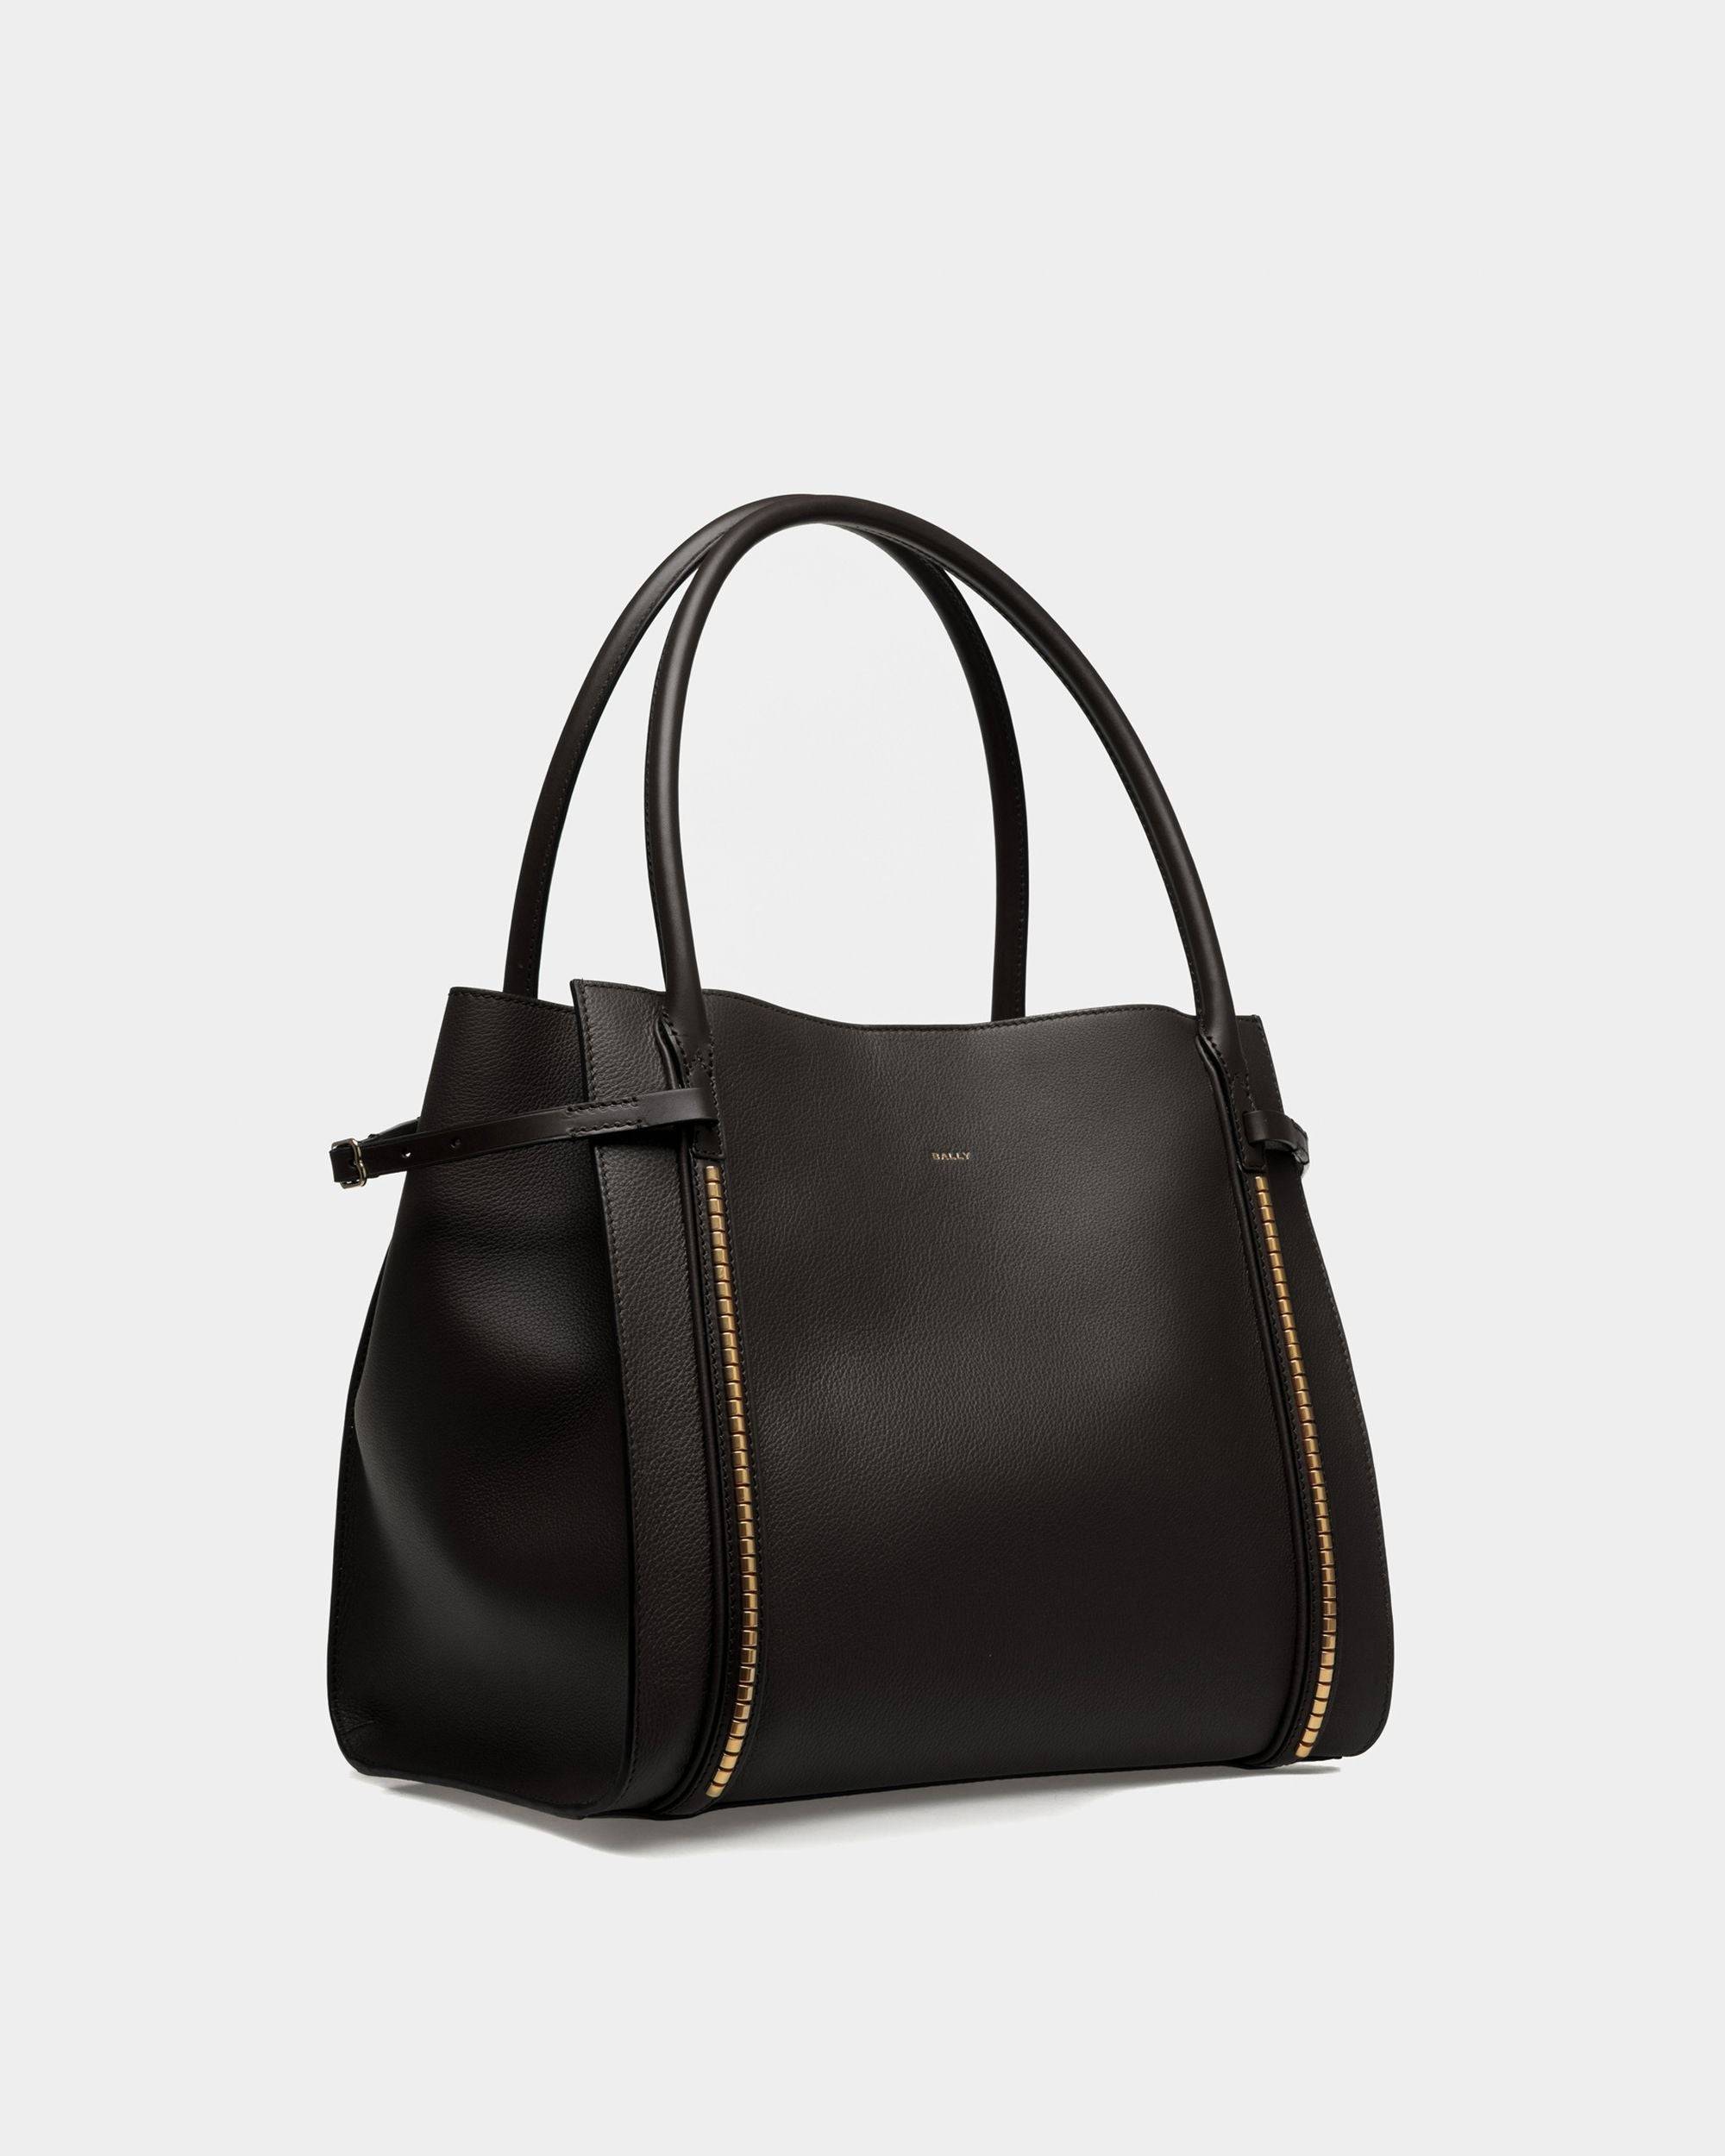 Chesney Large Tote Bag | Women's Tote | Black Leather | Bally | Still Life 3/4 Front